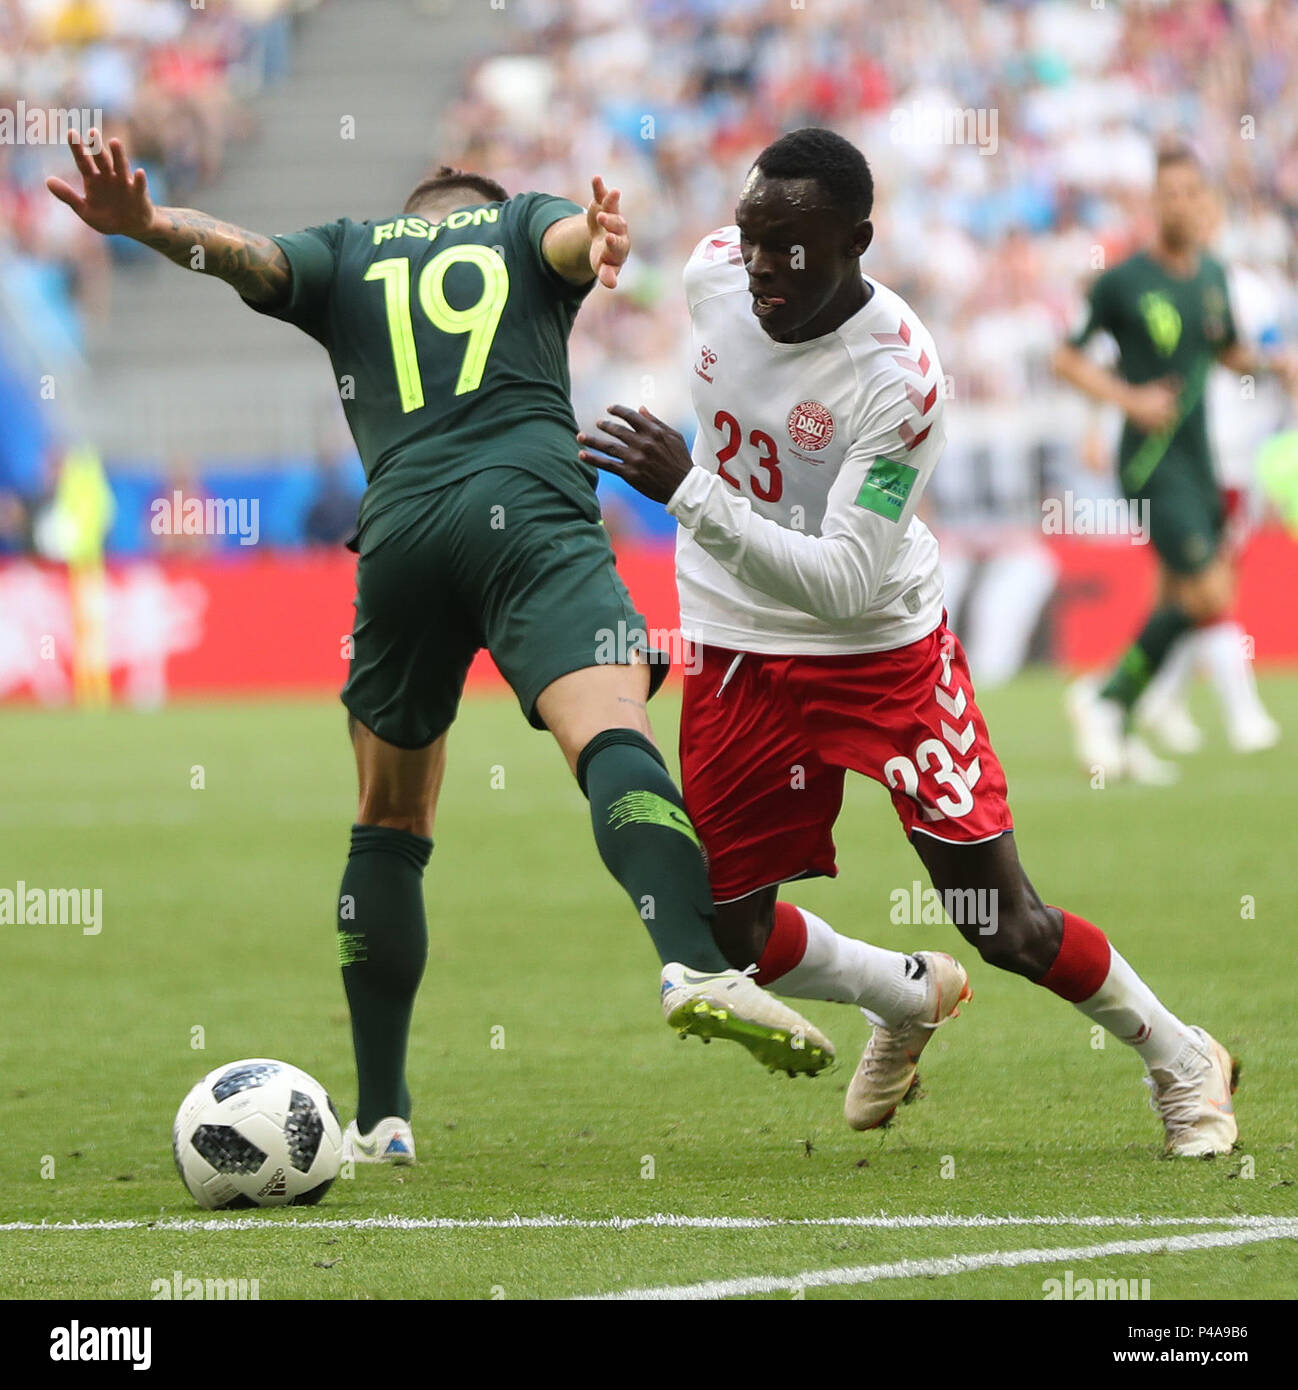 Samara, Russia. 21st June, 2018. Pione Sisto (R) of Denmark vies with Joshua Risdon of Australia during the 2018 FIFA World Cup Group C match between Denmark and Australia in Samara, Russia, June 21, 2018. The match ended in a 1-1 draw. Credit: Fei Maohua/Xinhua/Alamy Live News Stock Photo